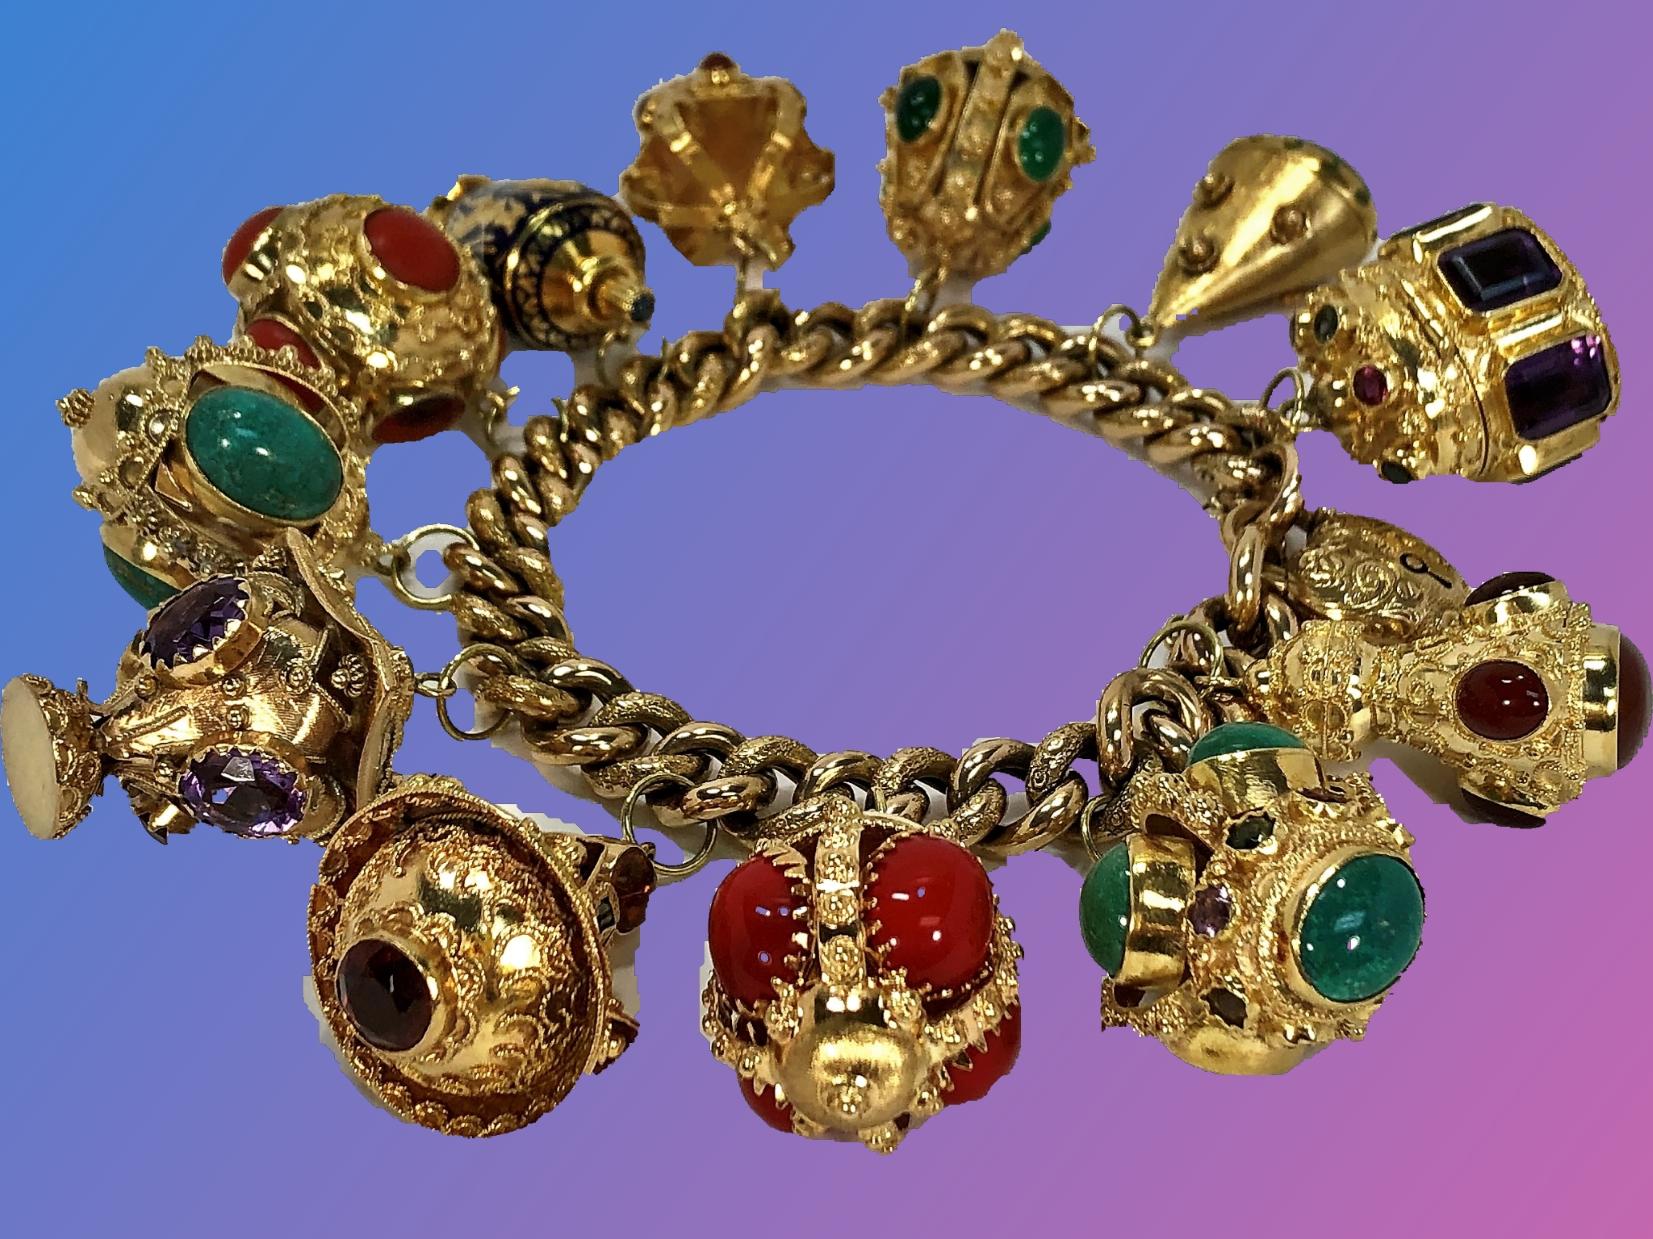 Cabochon Midcentury Italian Gold Etruscan Revival Charm Bracelet-12 Assorted Color Charms For Sale